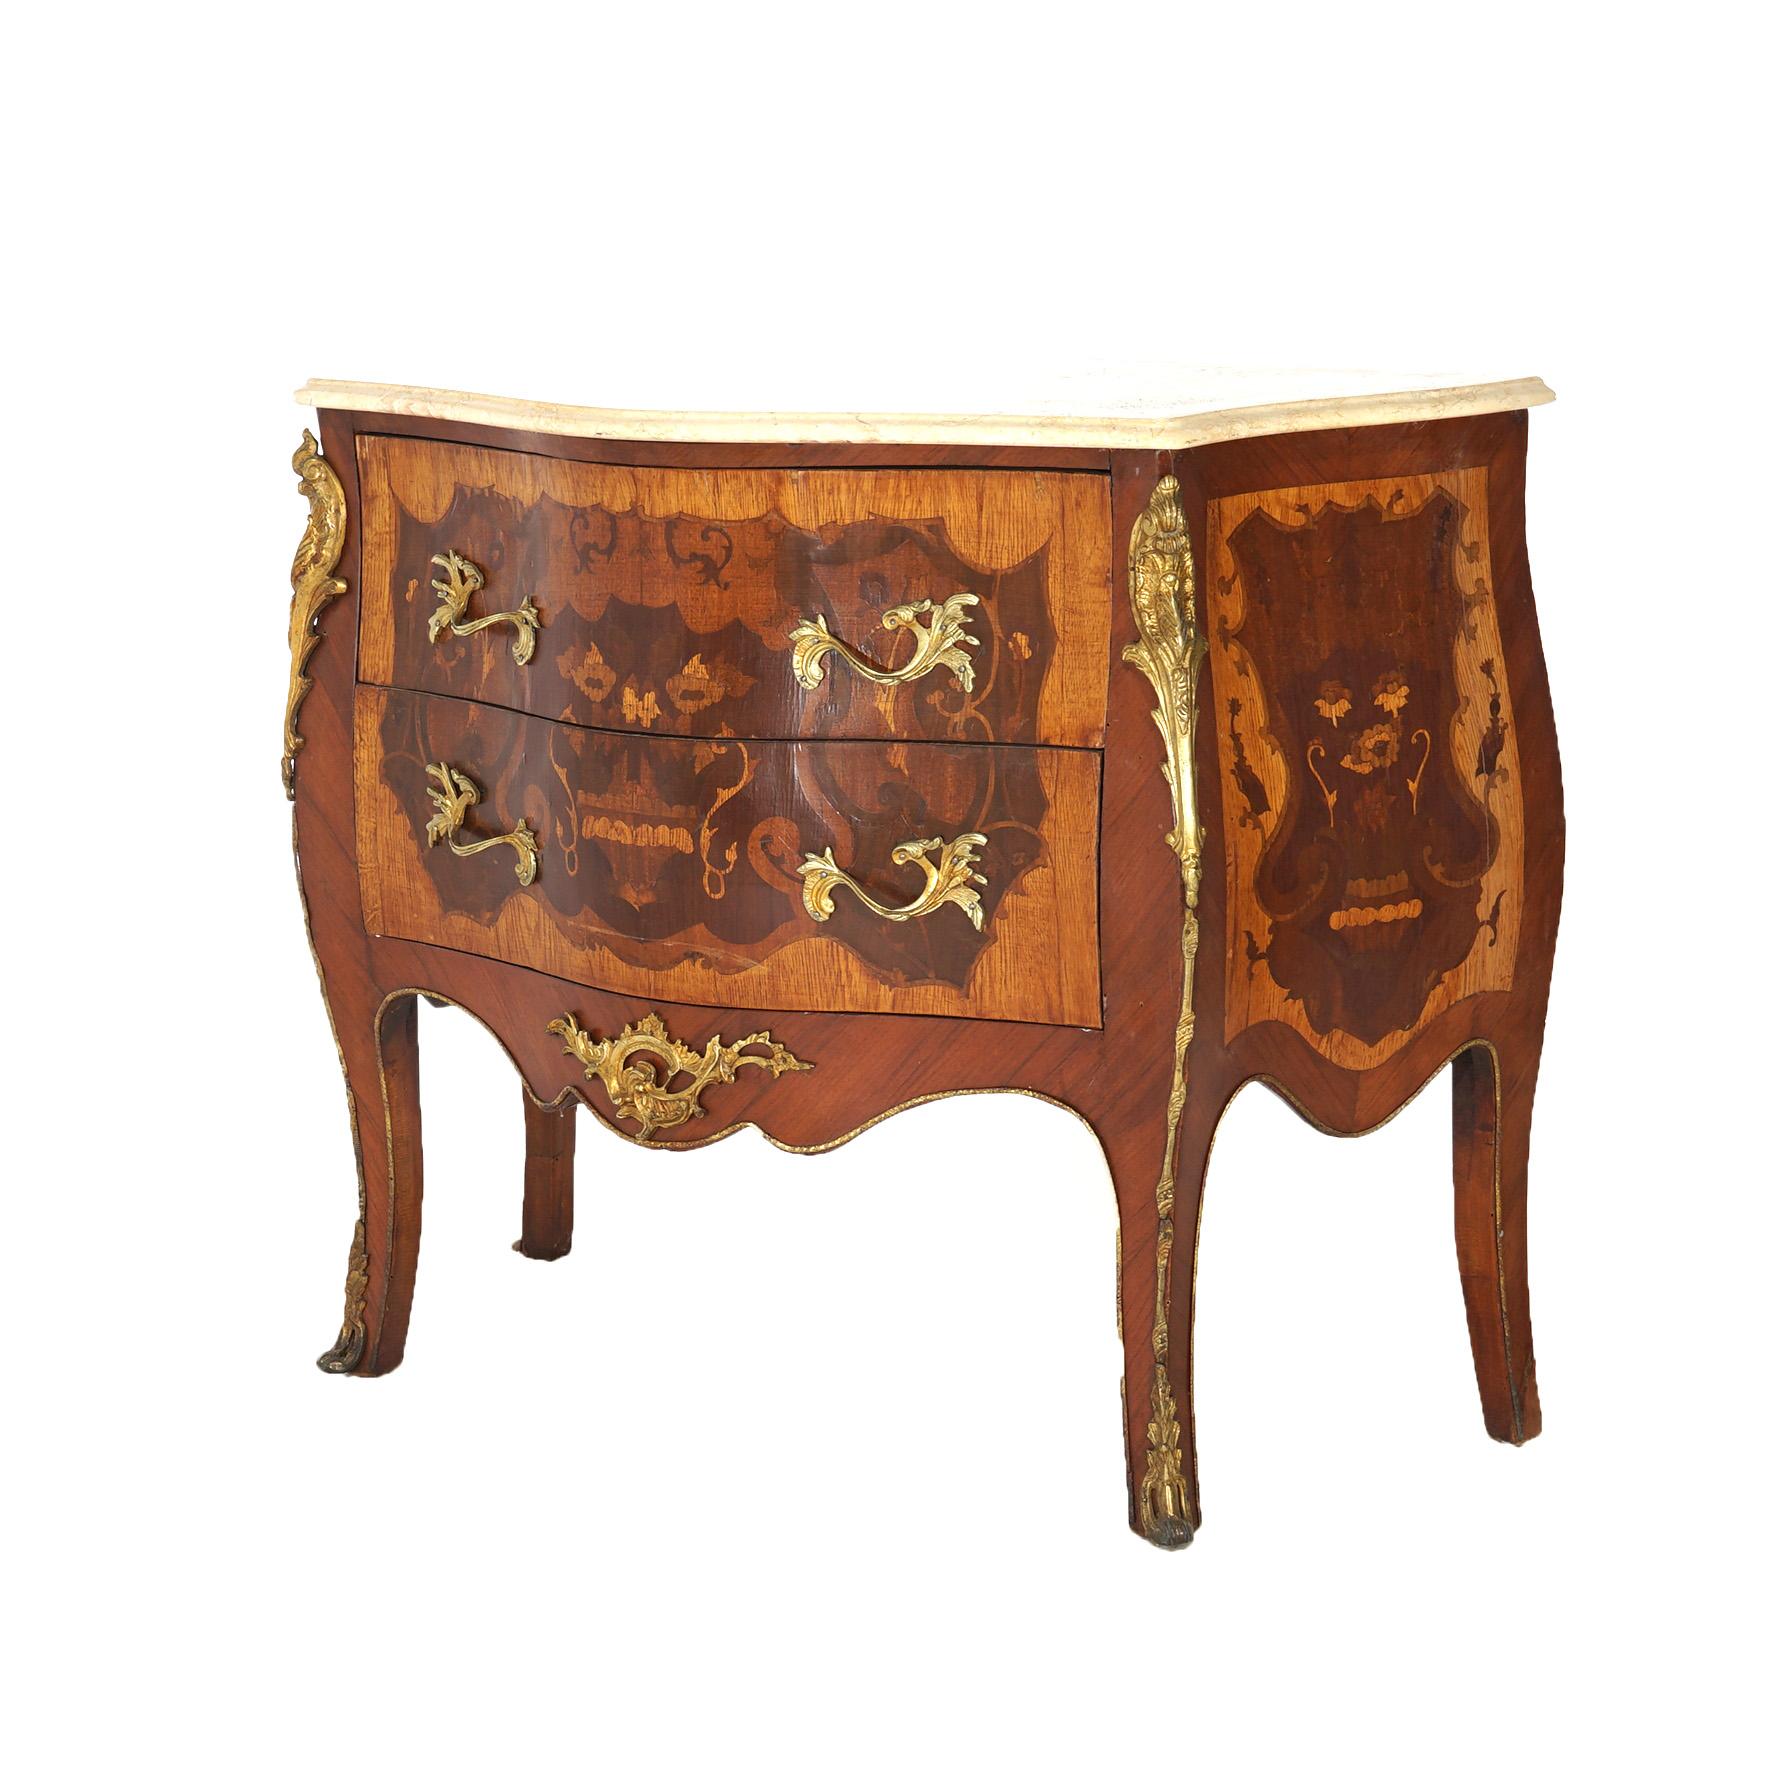 An antique French Louis XIV style commode offers shaped and beveled marble top over satinwood and kingwood case having two drawers, foliate and floral marquetry inlay, ormolu mounts and raised on cabriole legs, 20th century

Measures - 32